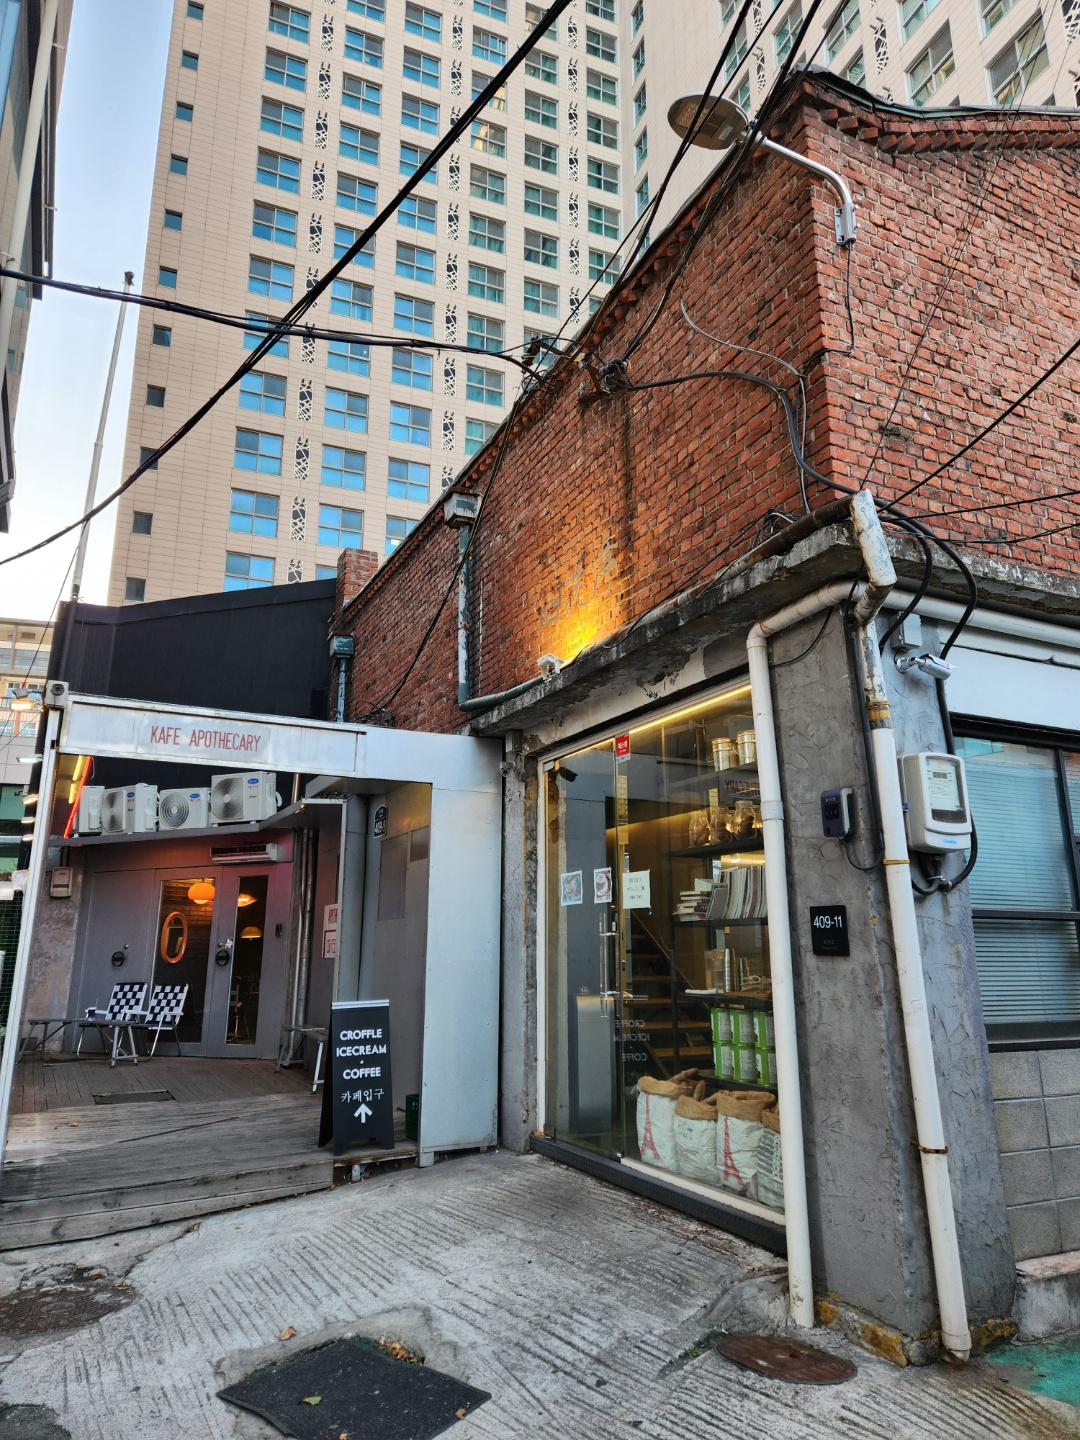 Bakery cafe Seshimjung is nestled in an old rice warehouse. (Choi Jae-hee / The Korea Herald)